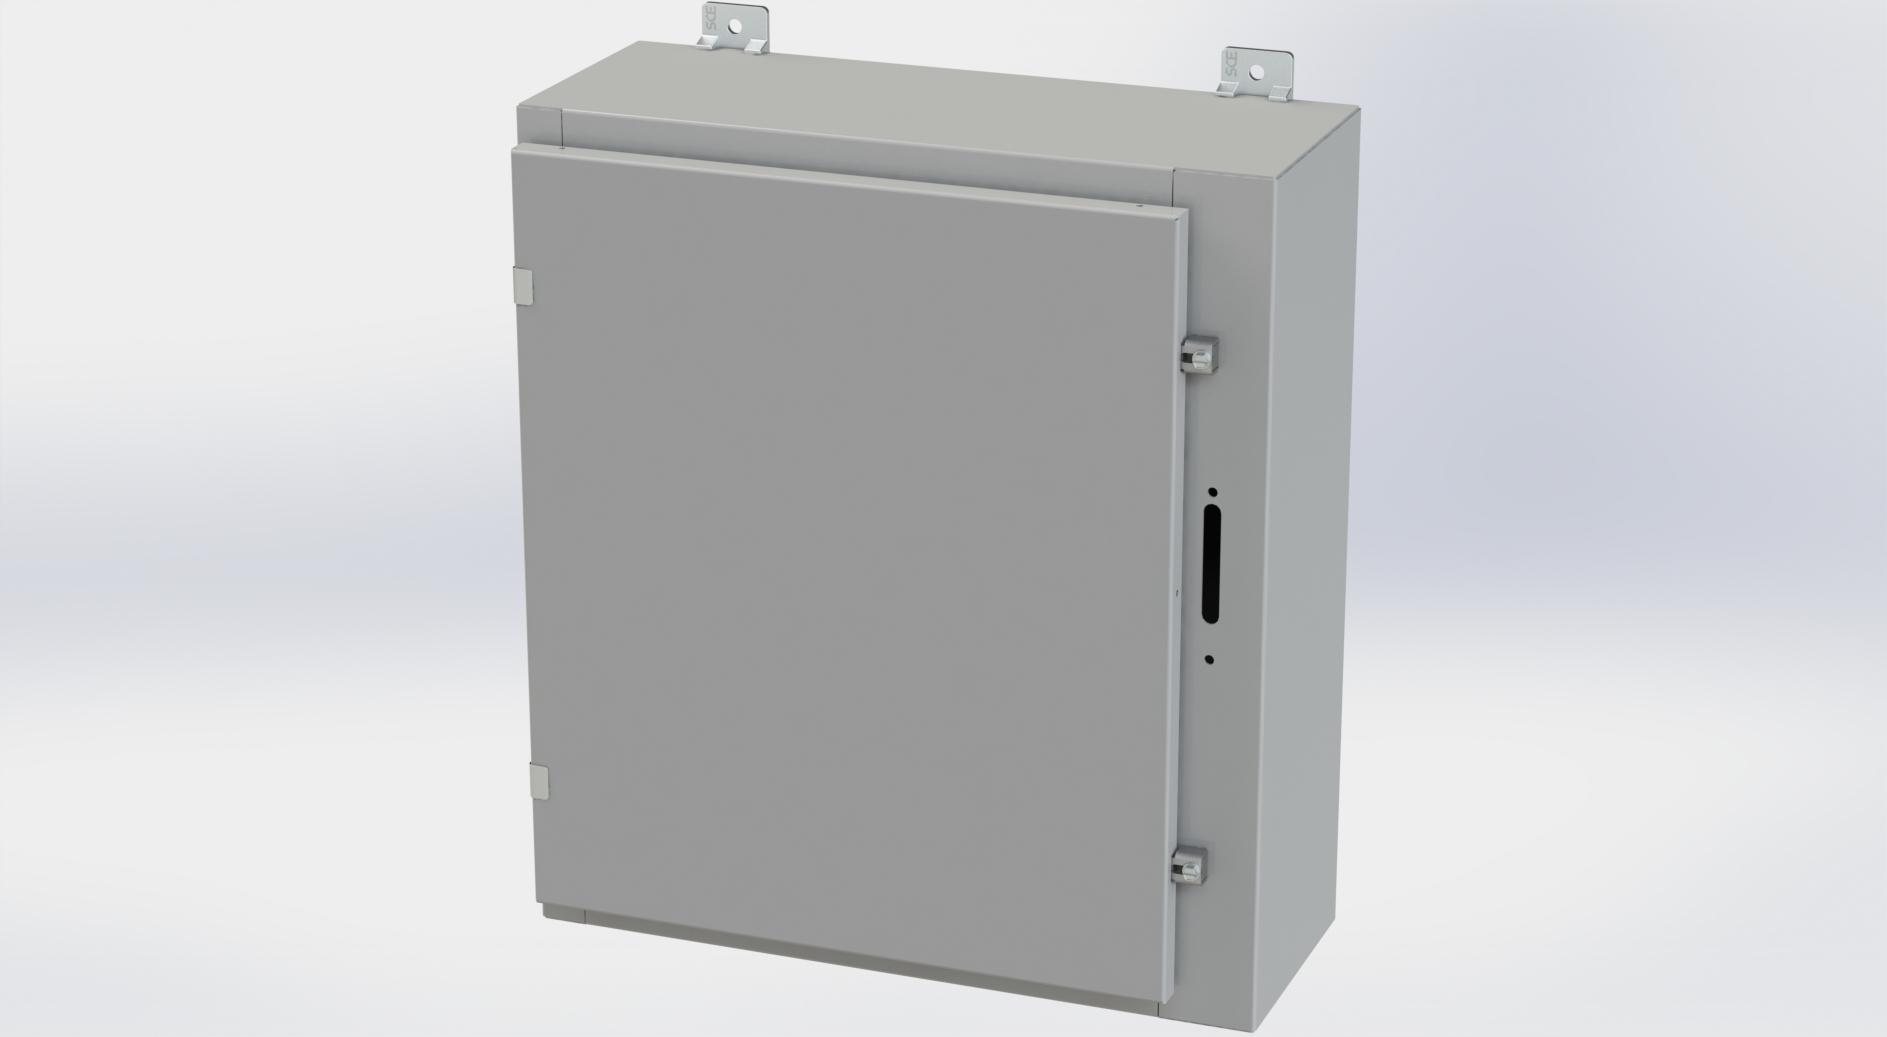 Saginaw Control SCE-24HS2108LP HS LP Enclosure, Height:24.00", Width:21.38", Depth:8.00", ANSI-61 gray powder coating inside and out. Optional sub-panels are powder coated white.